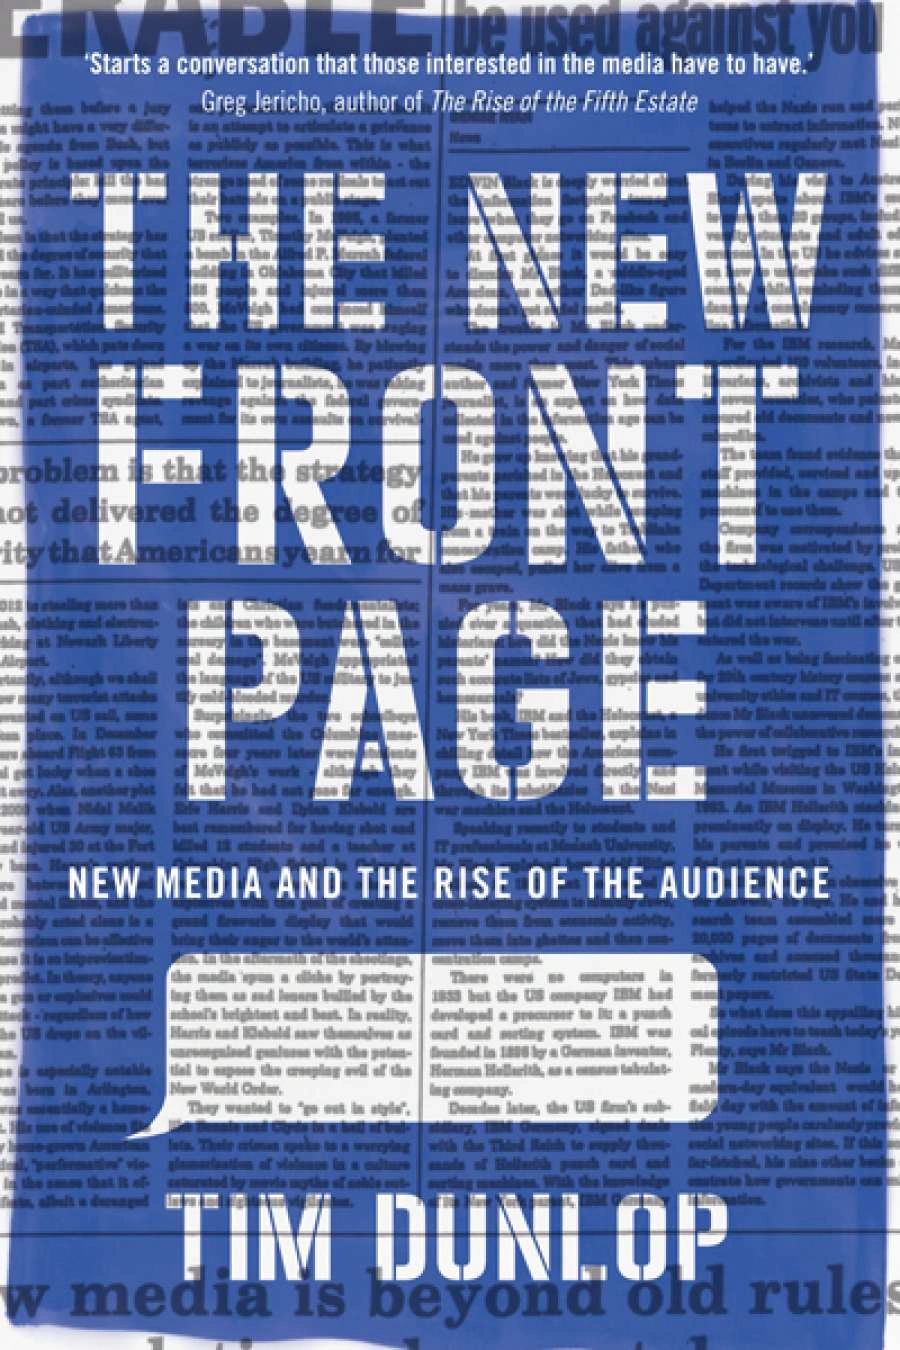 Gillian Terzis reviews New Front Page: New media rise of the audience' by